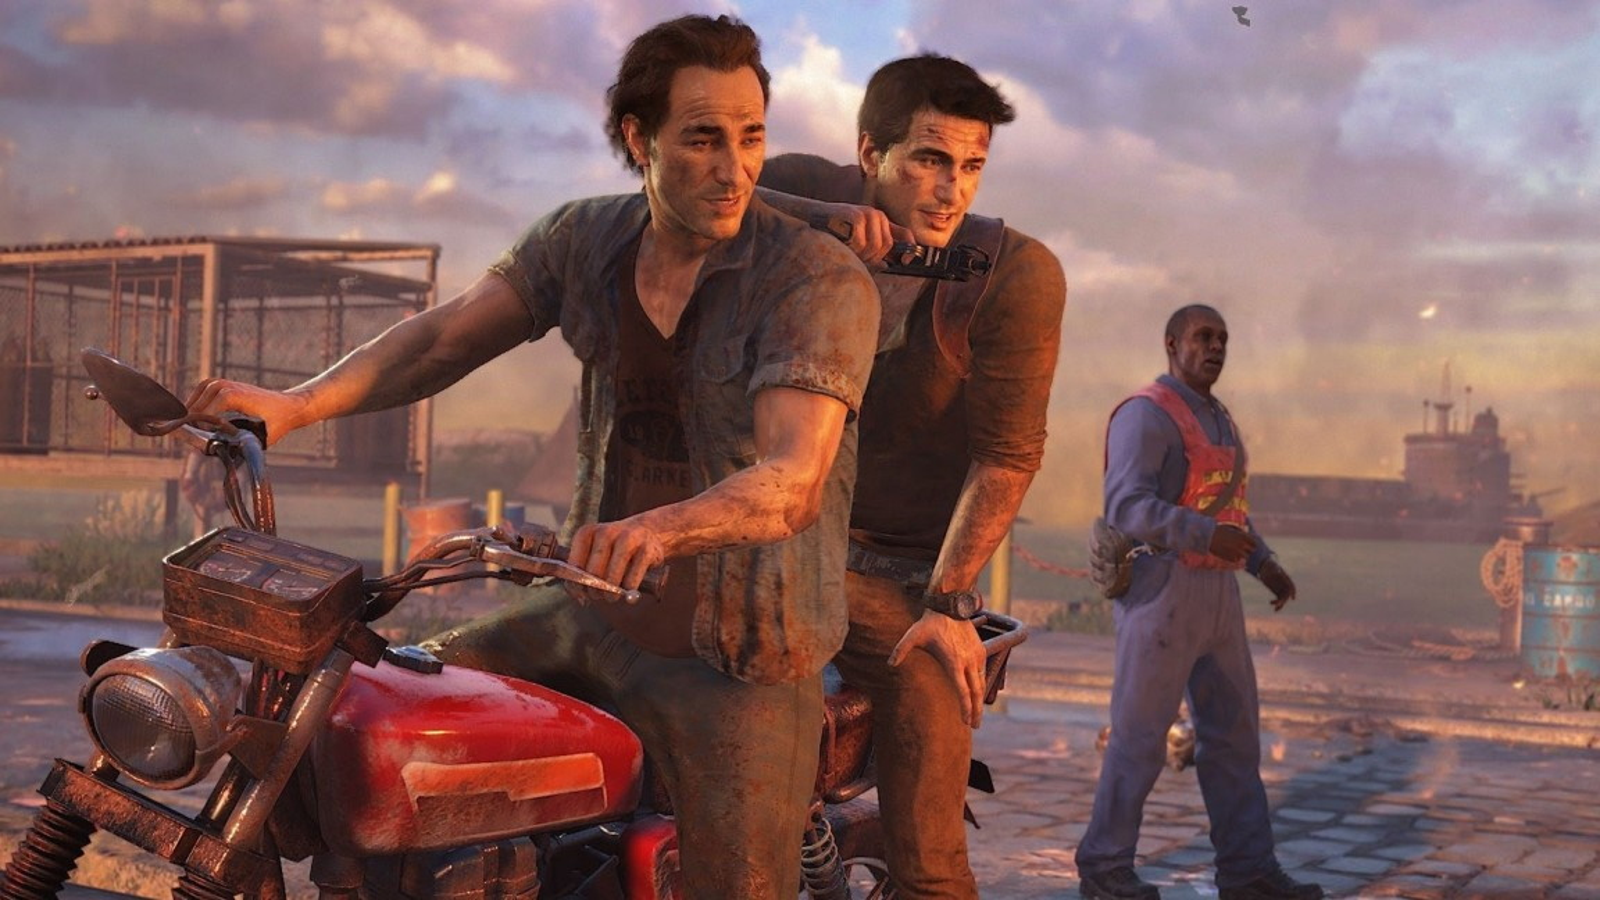 Uncharted 4: Trophy Guide